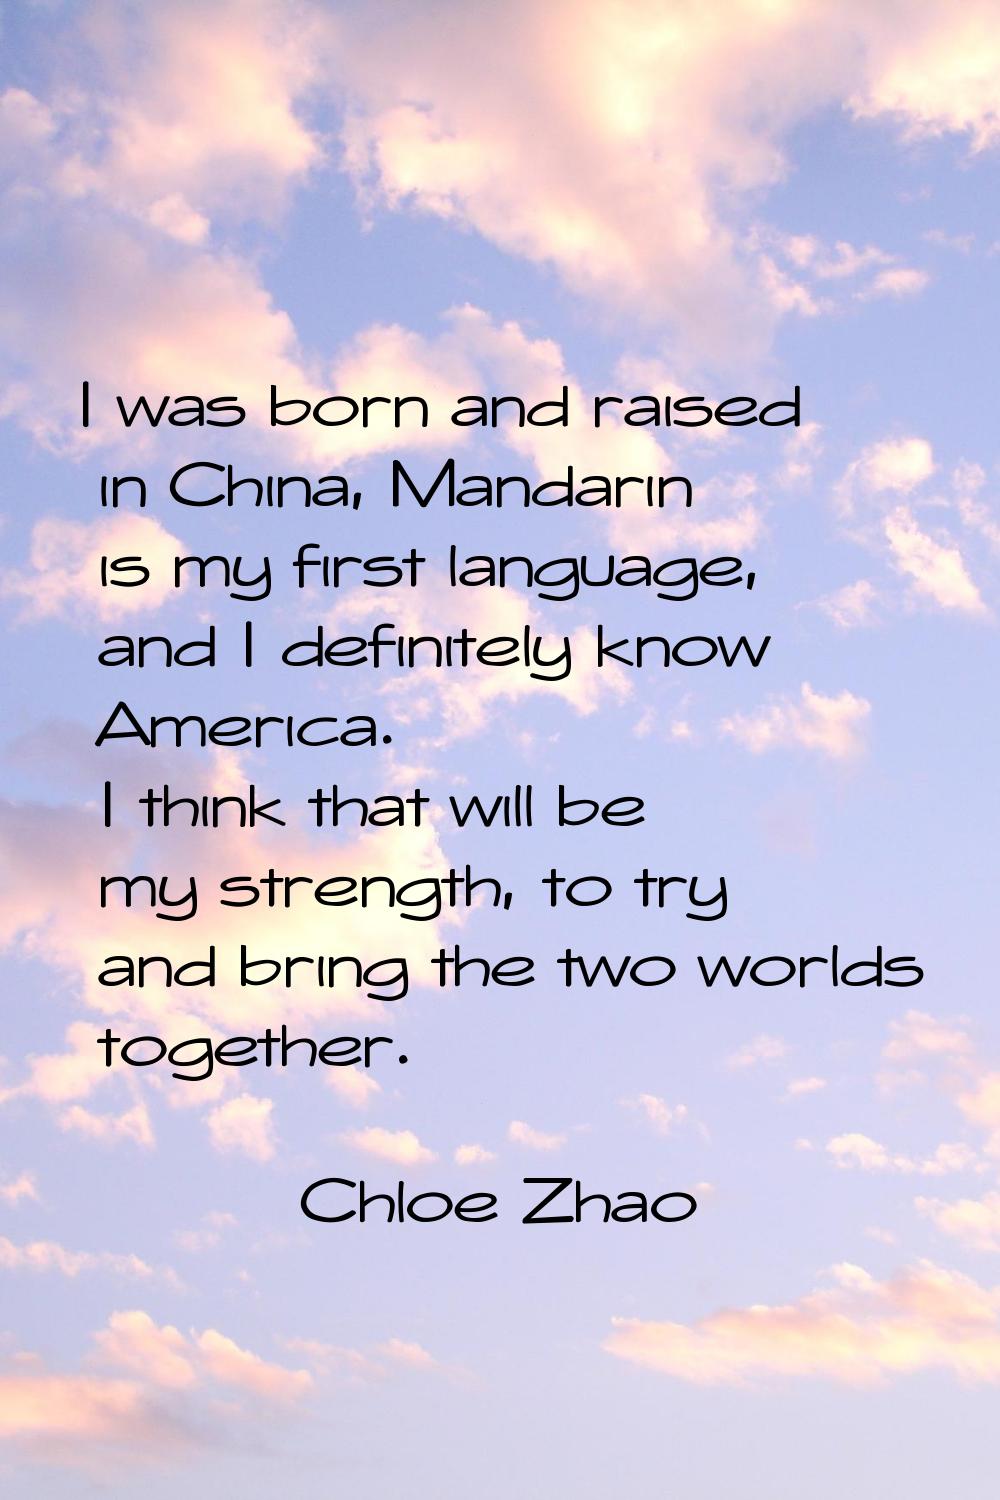 I was born and raised in China, Mandarin is my first language, and I definitely know America. I thi